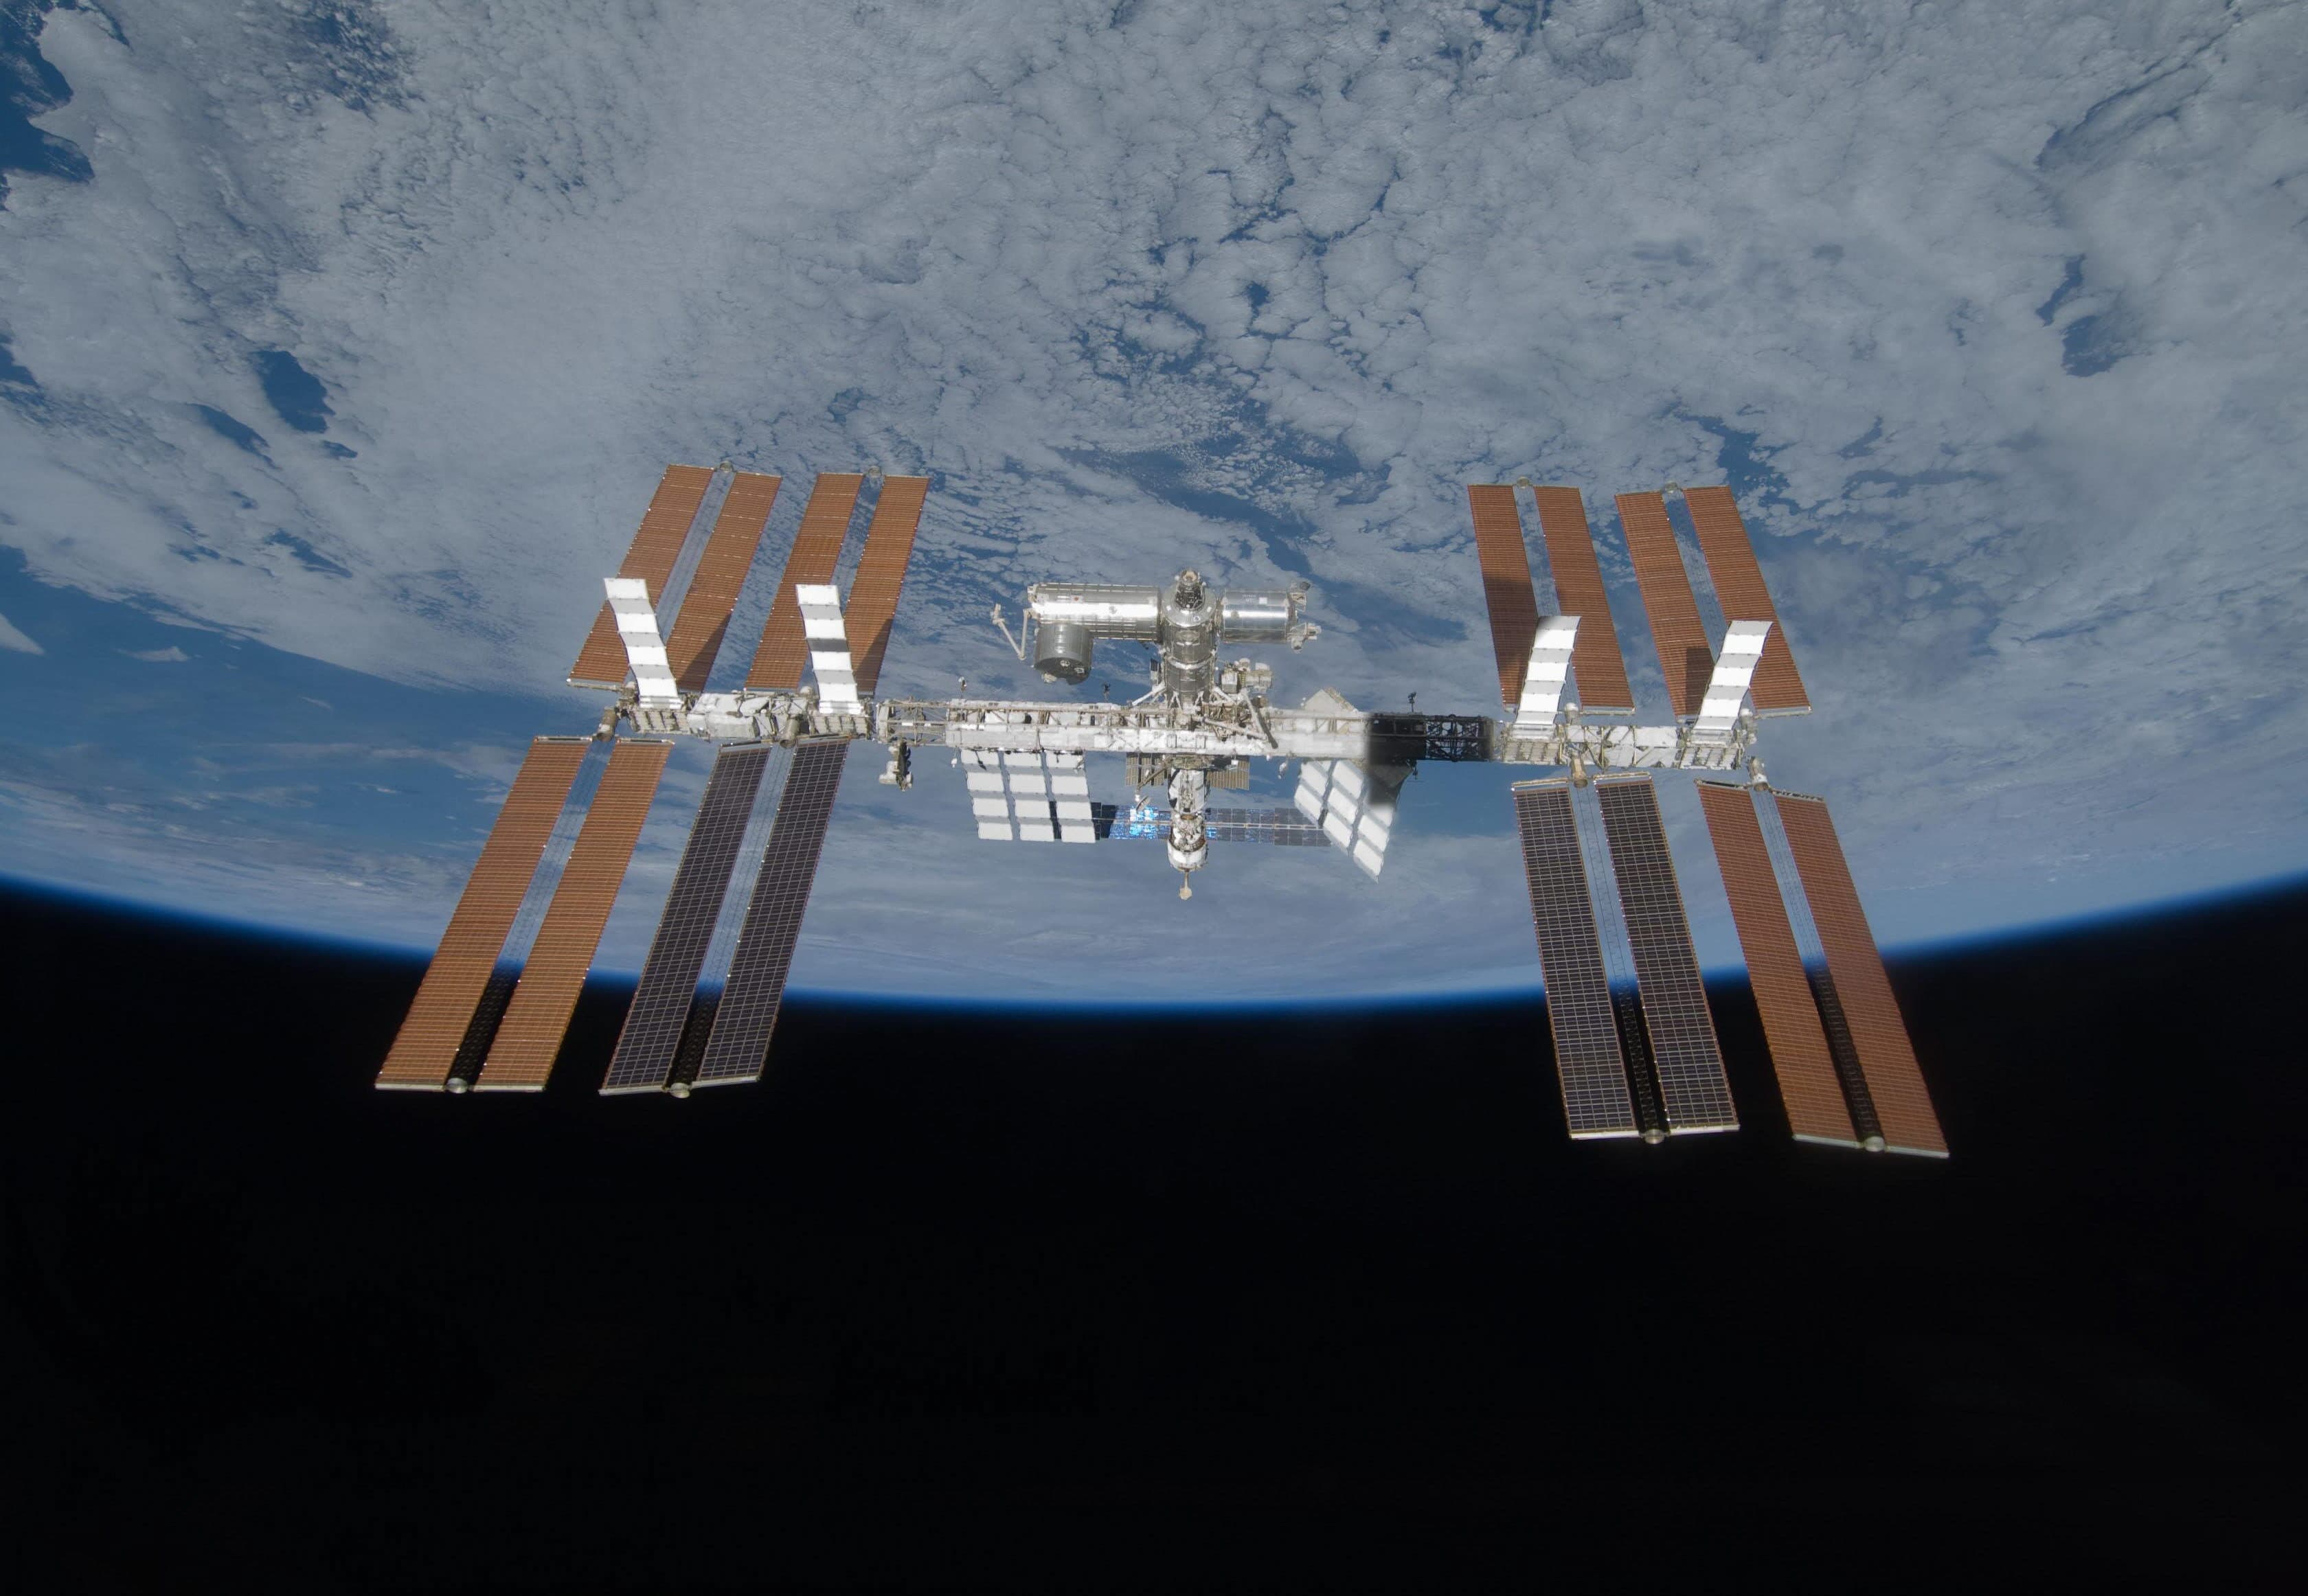 Russia announces it will leave the International Space Station "after 2024"